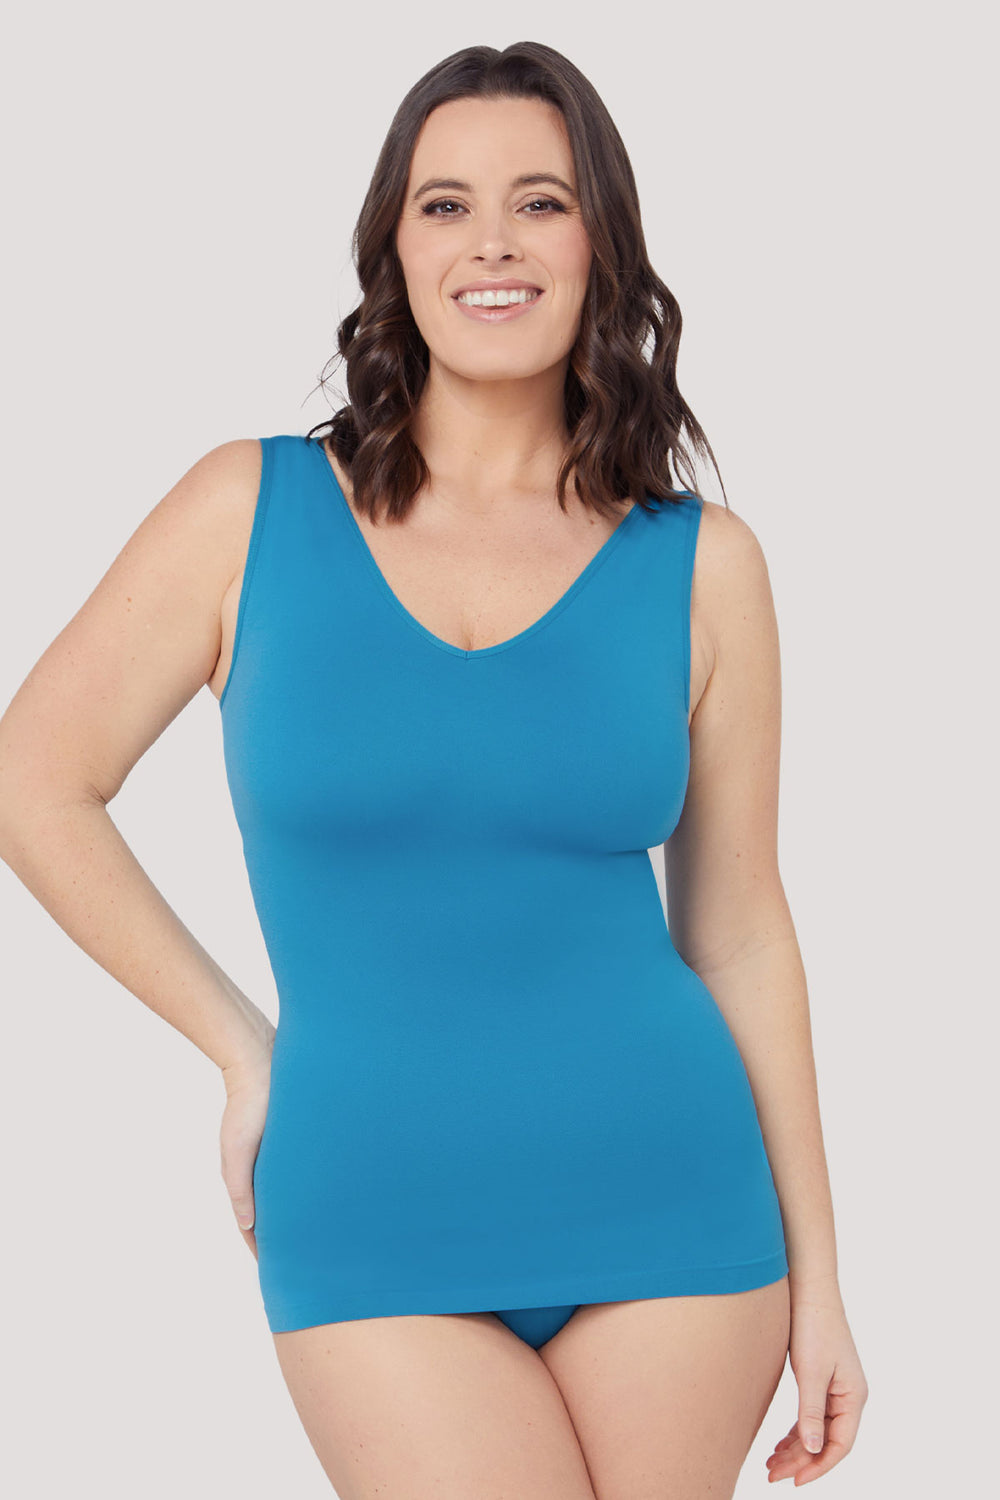 Women's comfortable Reversible Neckline, shaping and firming cami | Camyz Shapewear Smoothing Tank I Bella Bodies Australia I Blue Teal | Front